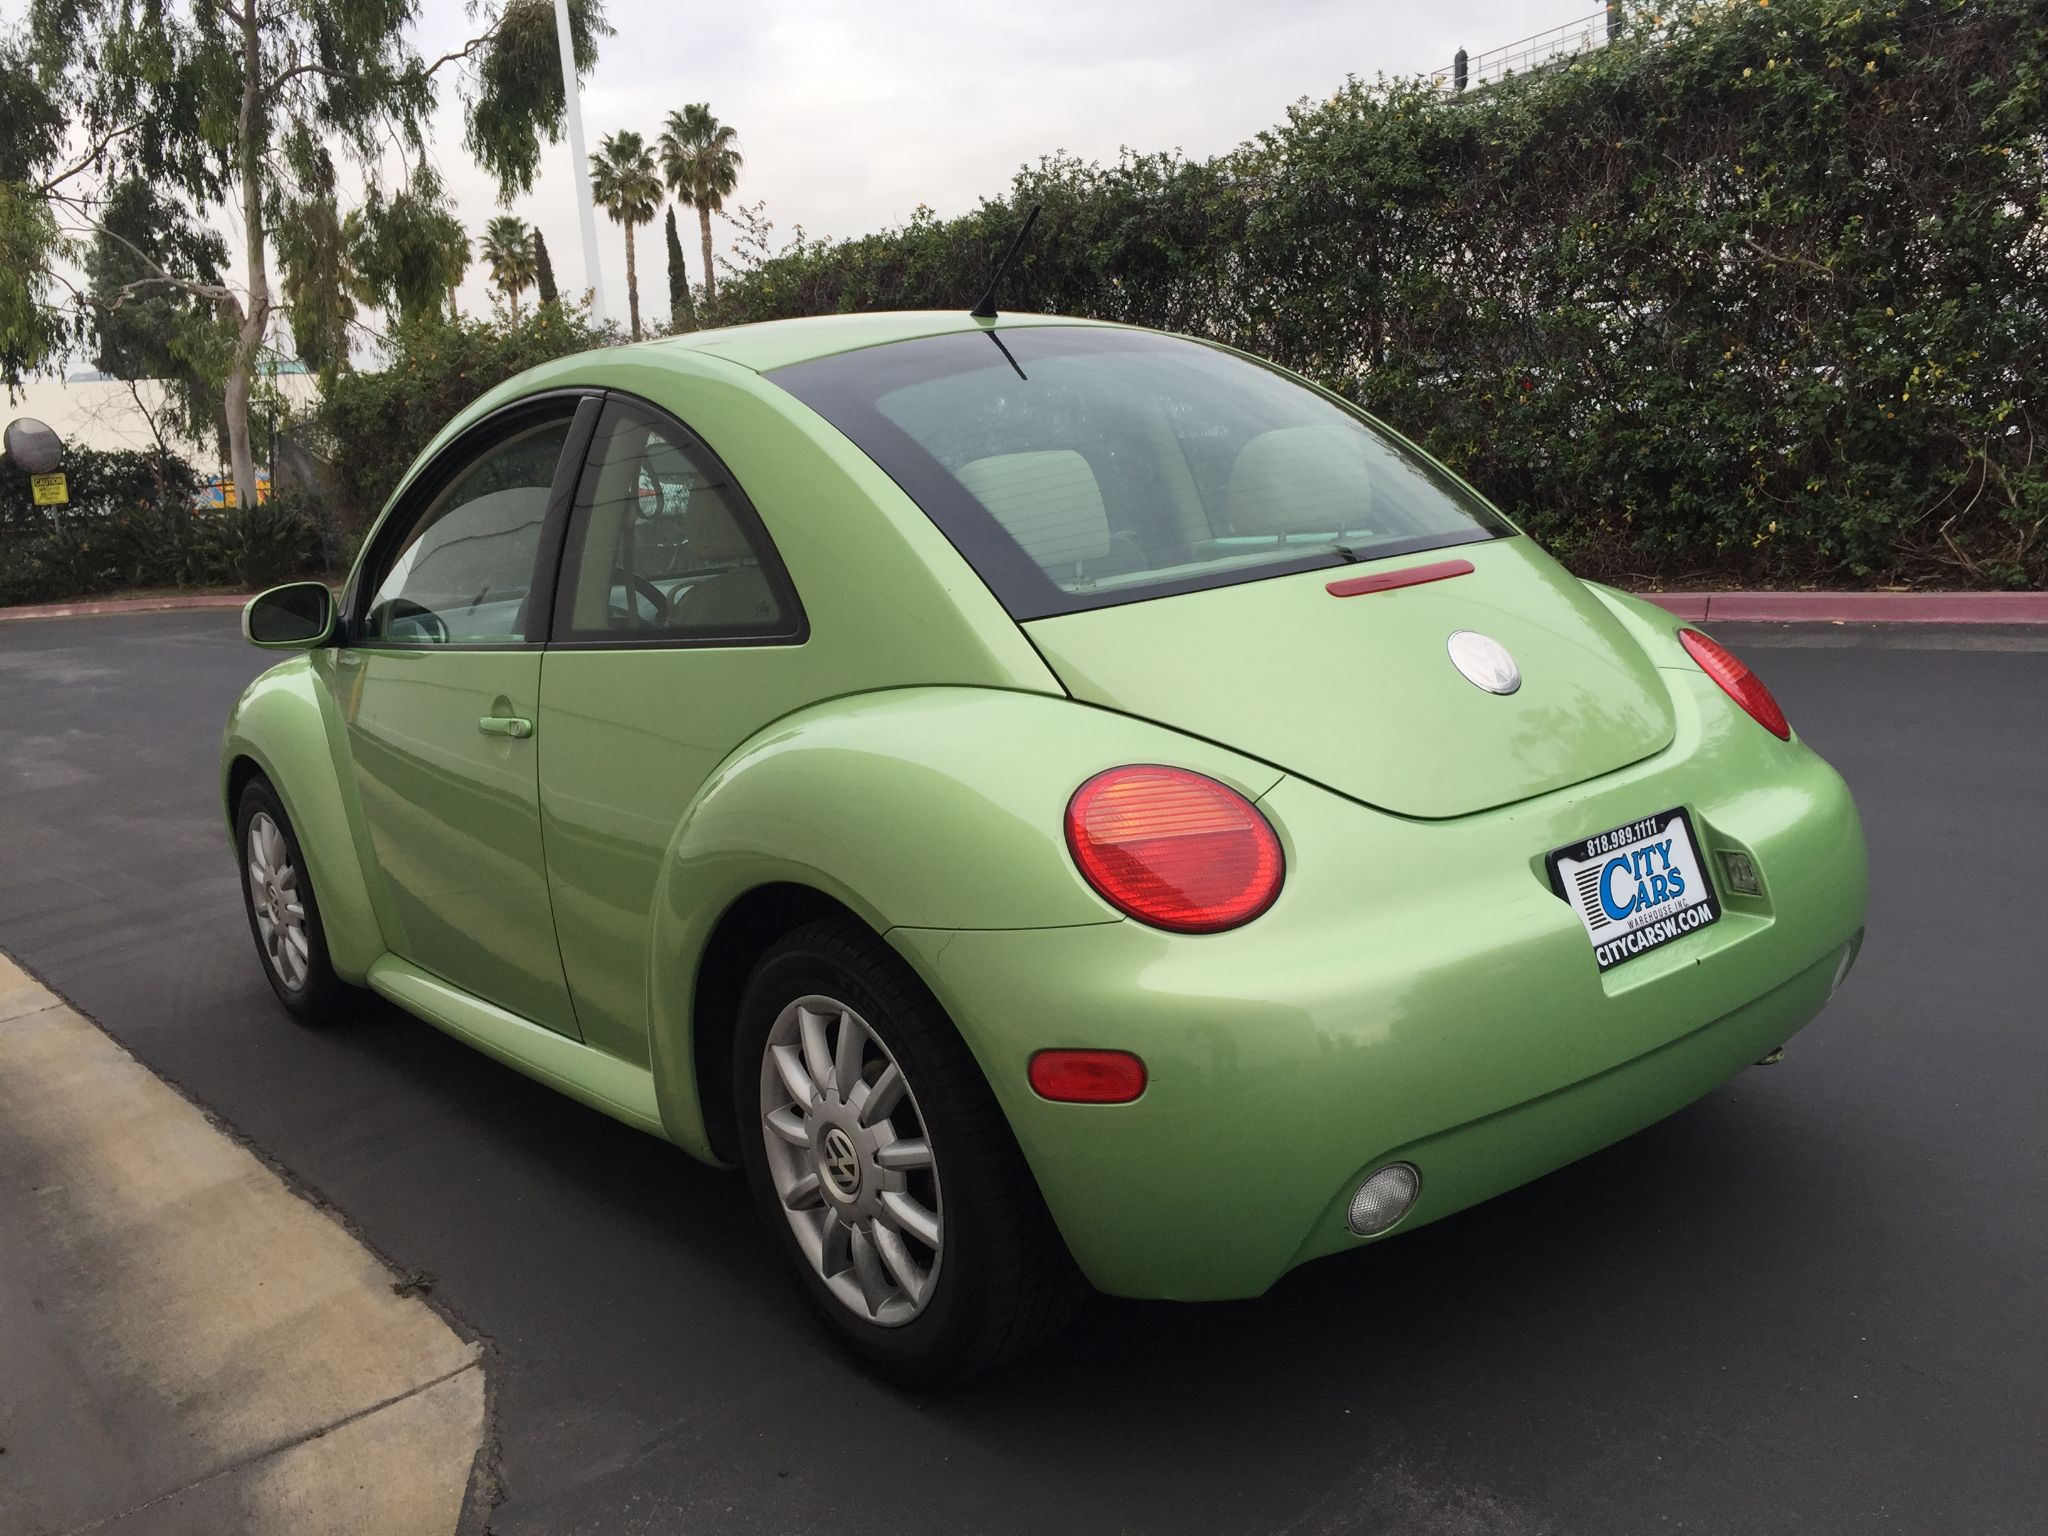 Used 2005 Volkswagen New Beetle GLS at City Cars Warehouse INC